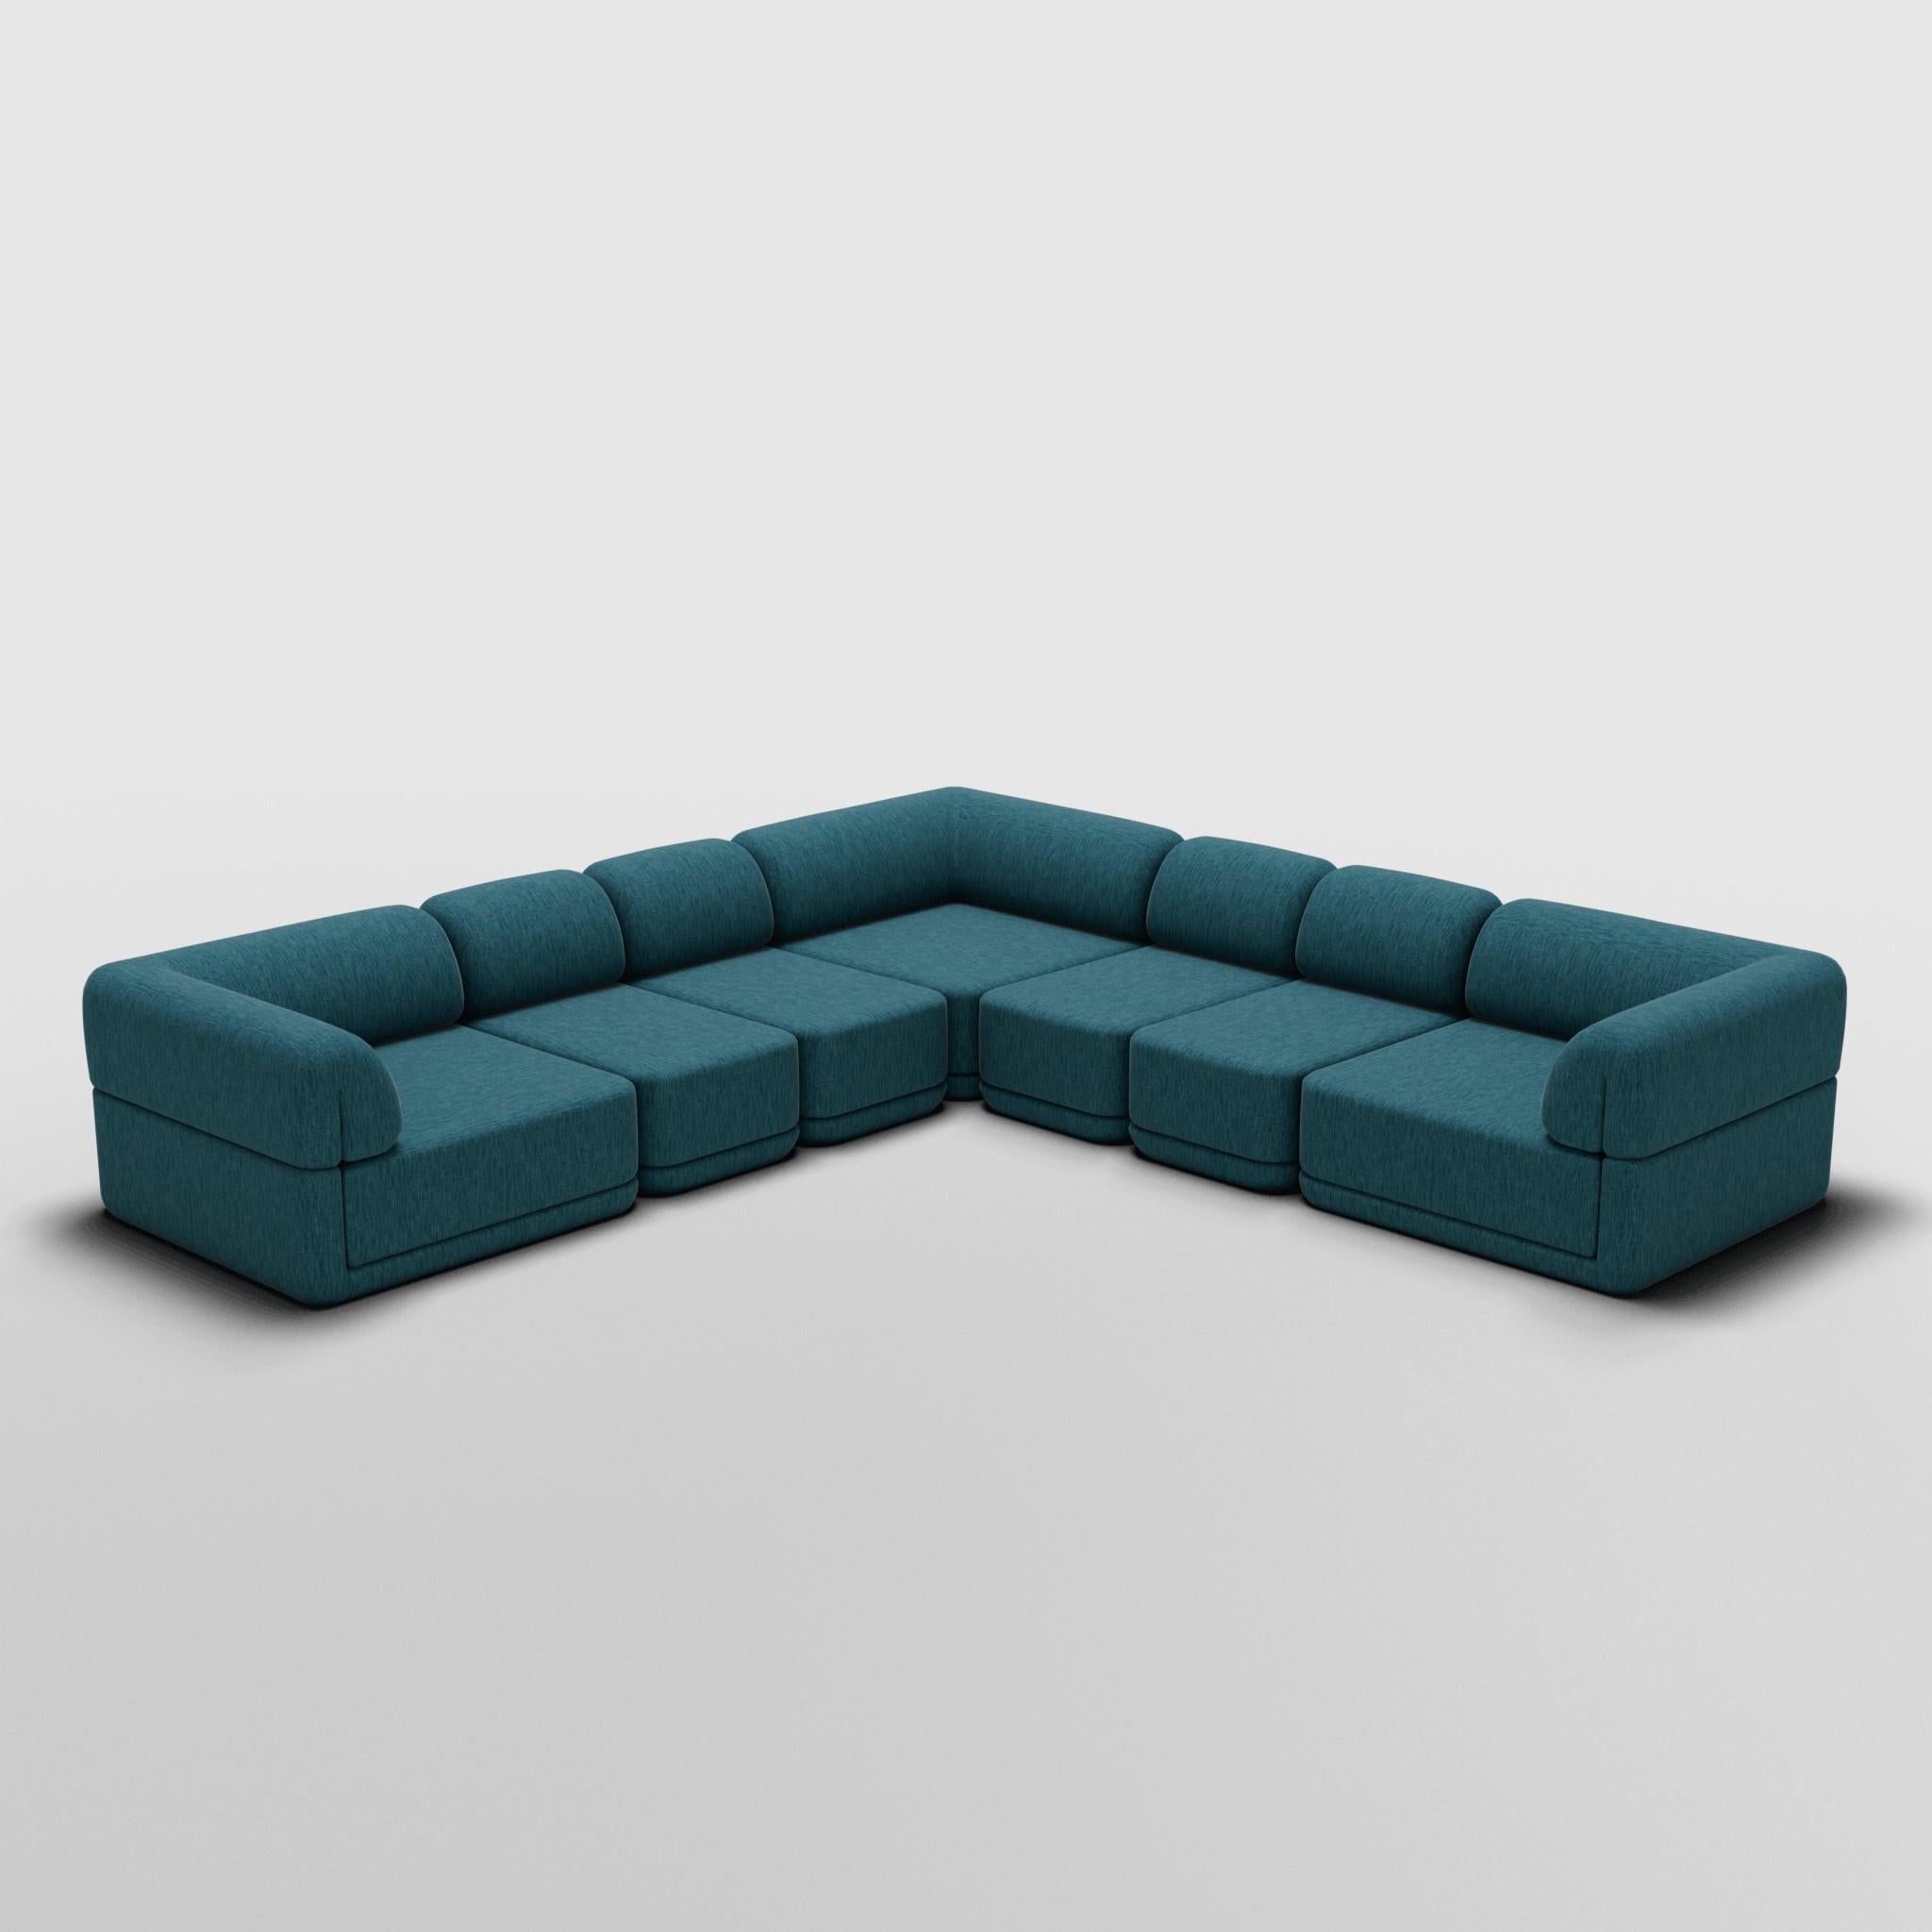 Corner Slim Sectional - Inspired by 70s Italian Luxury Furniture

Discover The Cube Sofa, where art meets adaptability. Its sculptural design and customizable comfort create endless possibilities for your living space. Make a statement, elevate your